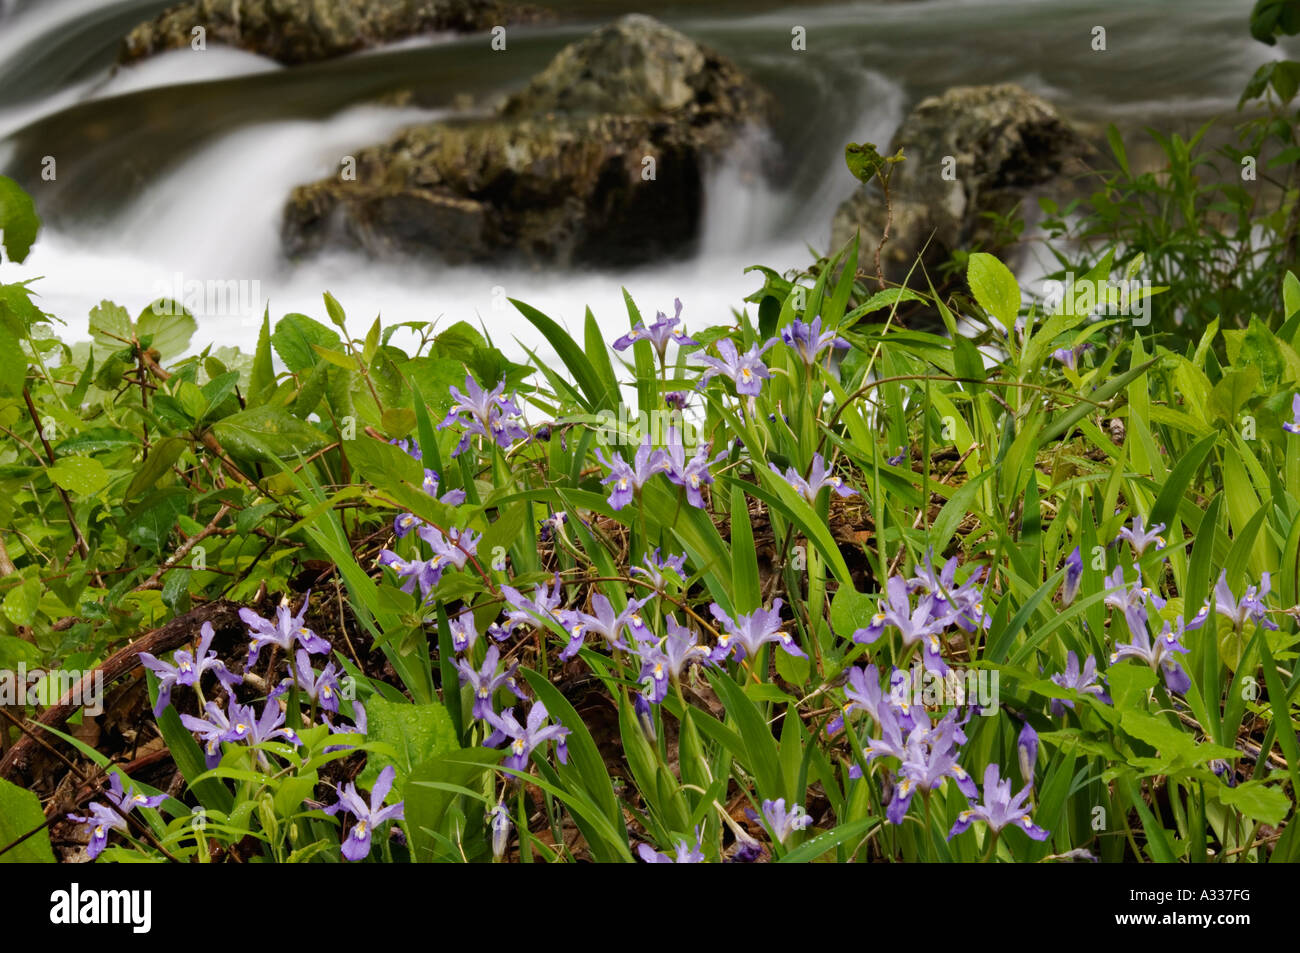 Crested Dwarf Iris Blooming Beside Rapids on Little Pigeon River Greenbrier Great Smoky Mountains National Park Tennessee Stock Photo